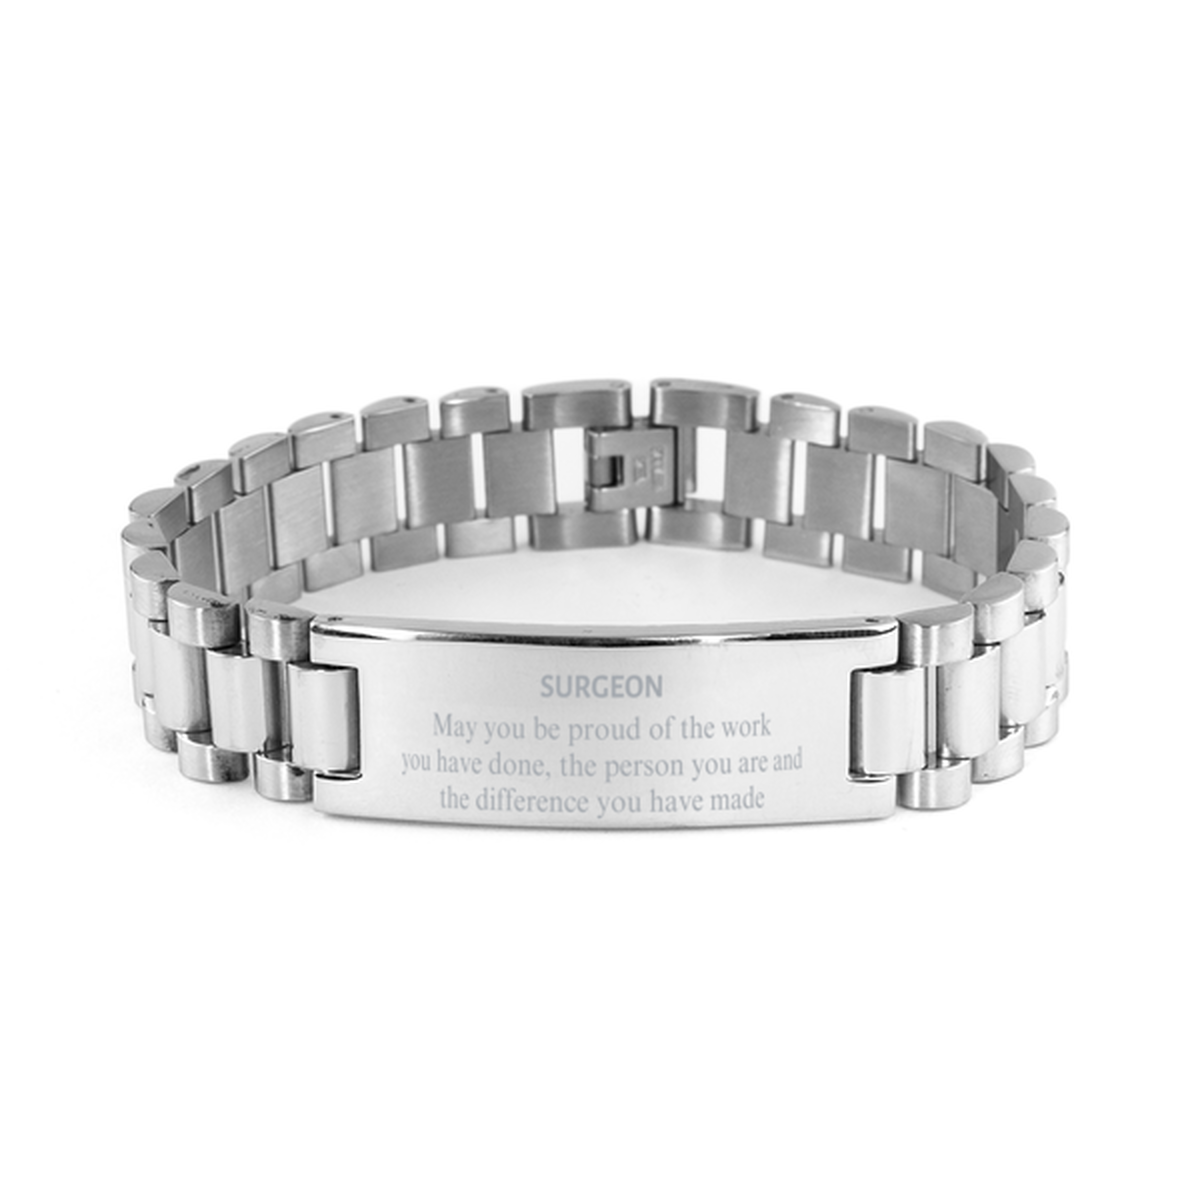 Surgeon May you be proud of the work you have done, Retirement Surgeon Ladder Stainless Steel Bracelet for Colleague Appreciation Gifts Amazing for Surgeon